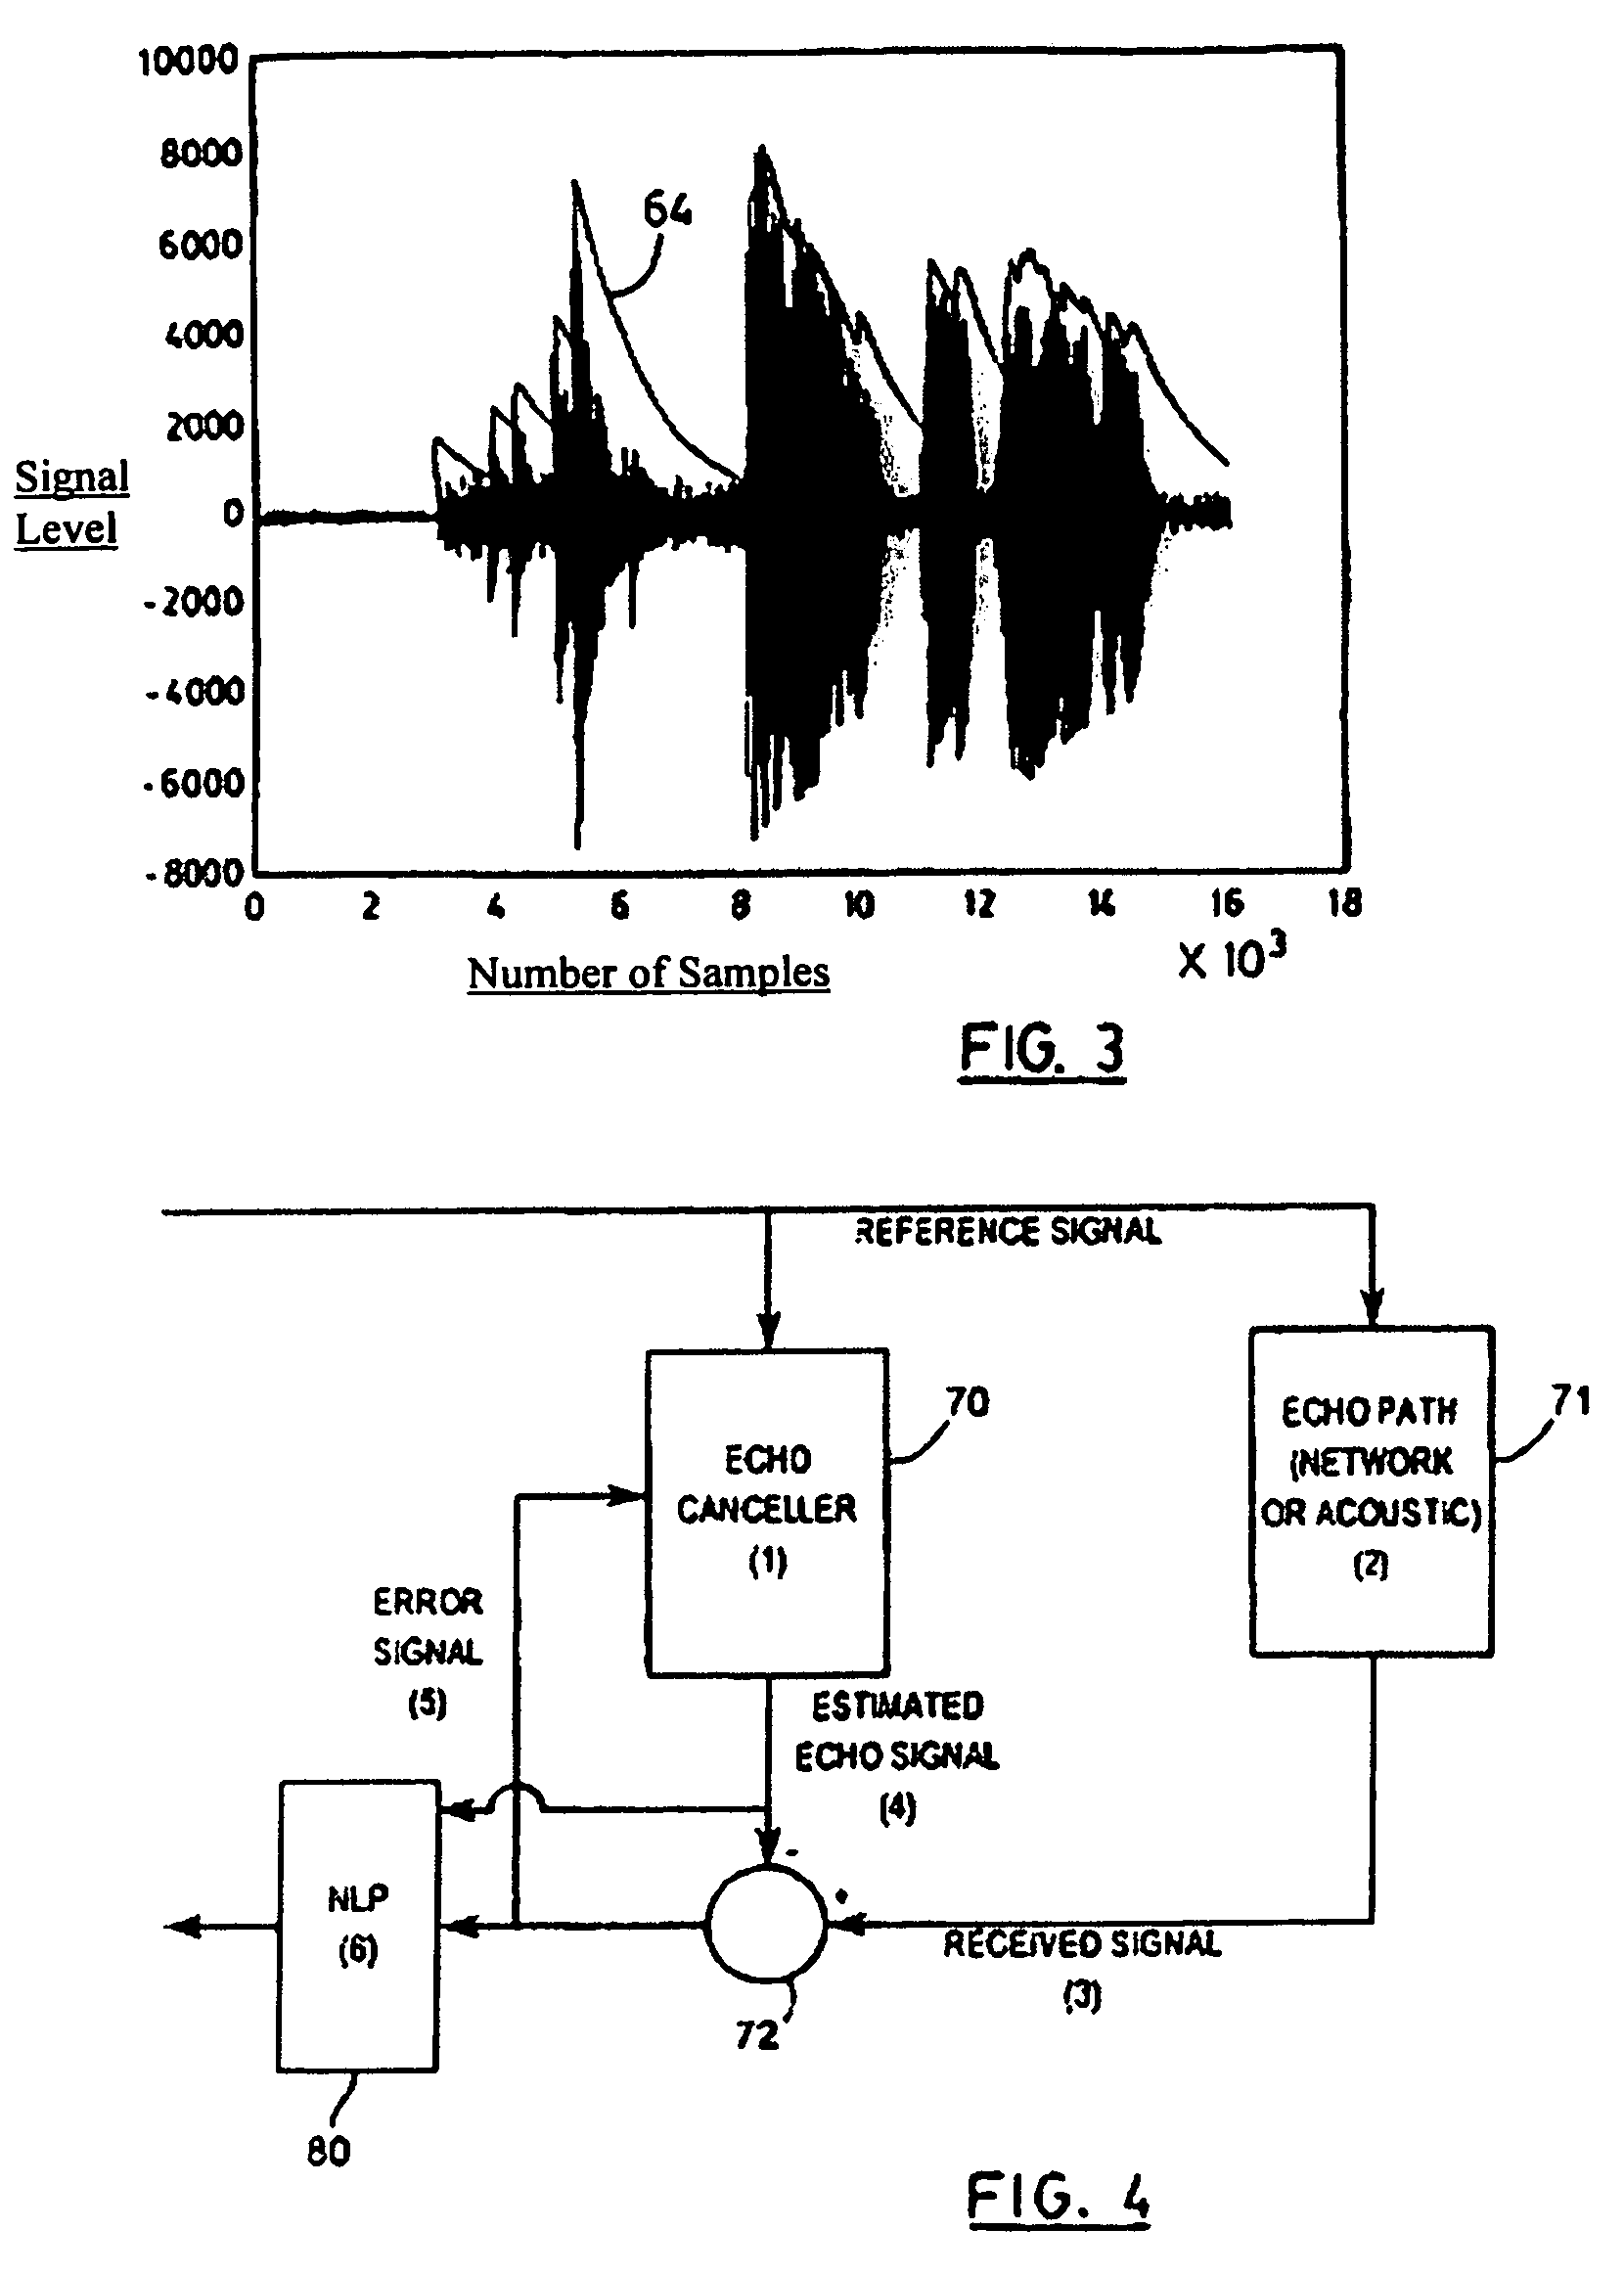 Echo cancellation/suppression and double-talk detection in communication paths